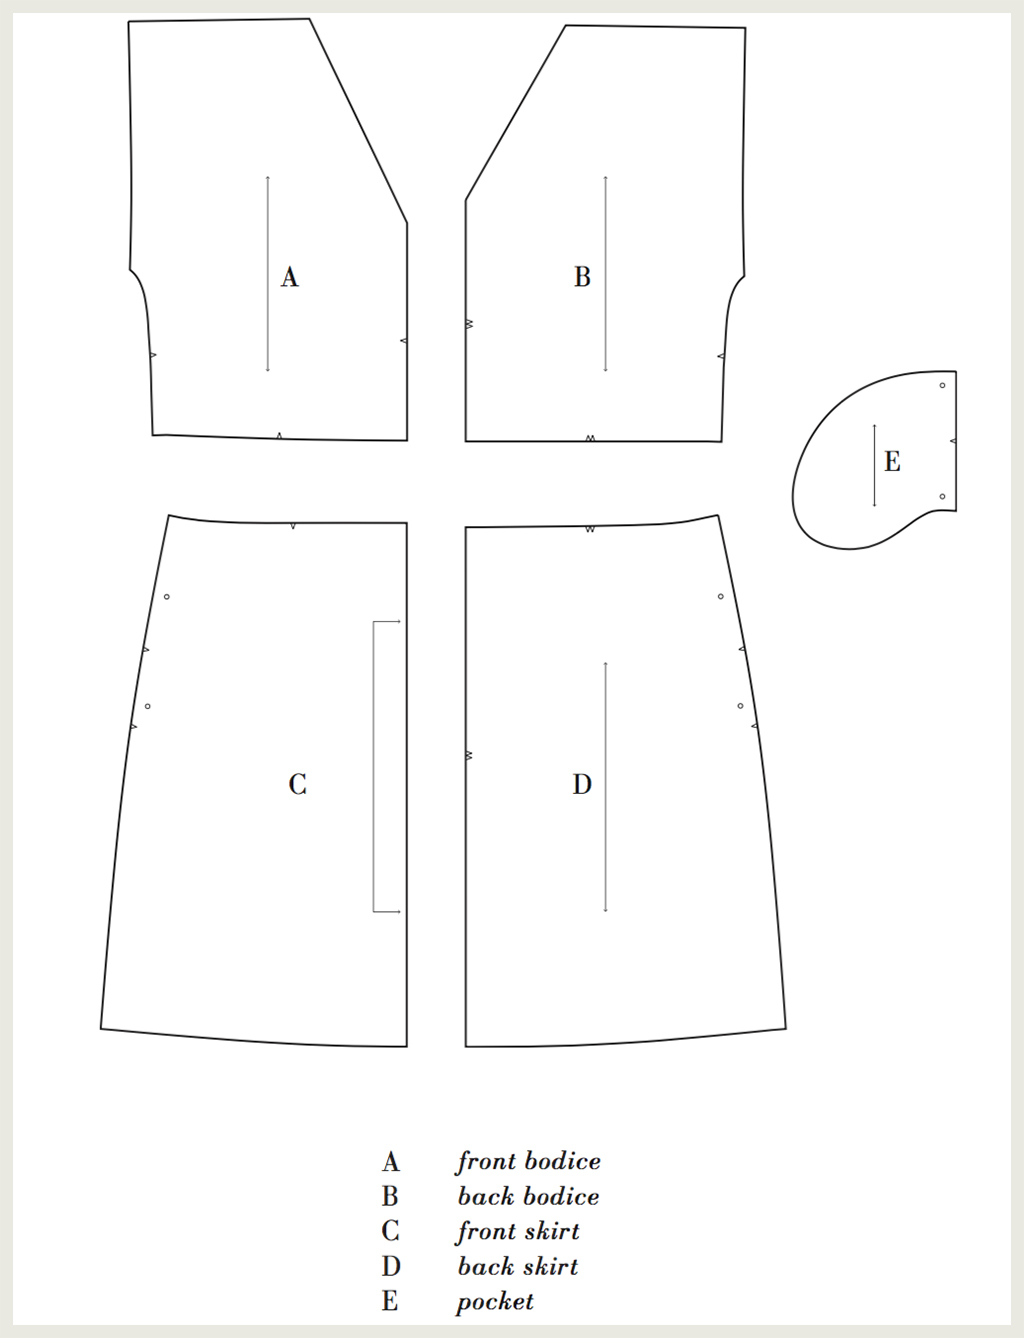 The Anatomy of a Sewing Pattern